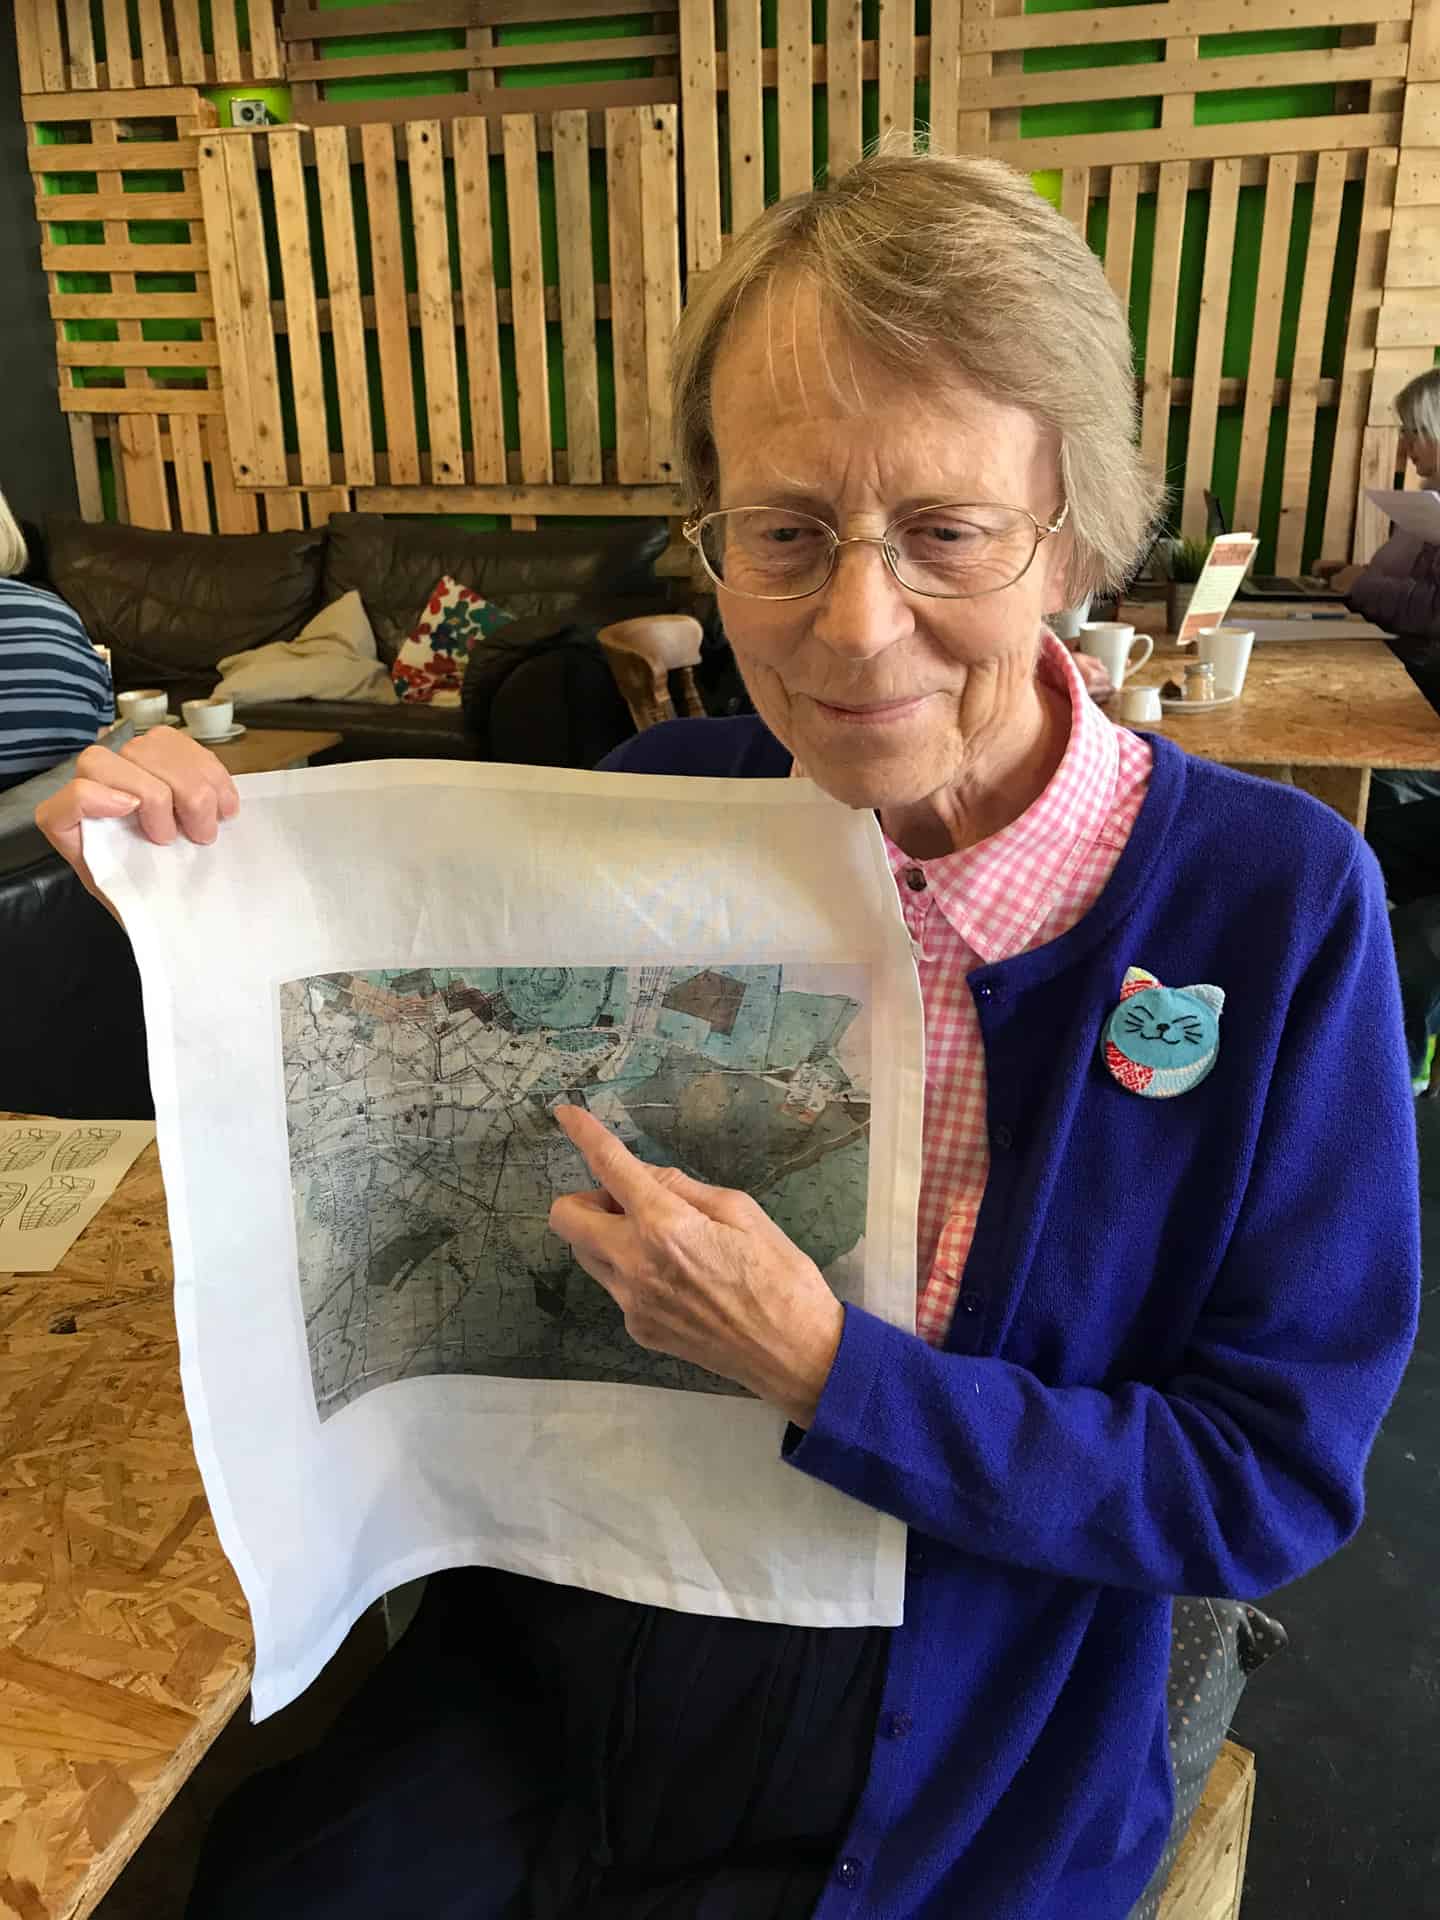 Wendy with her printed fabric showing places she remembers visiting as a child.